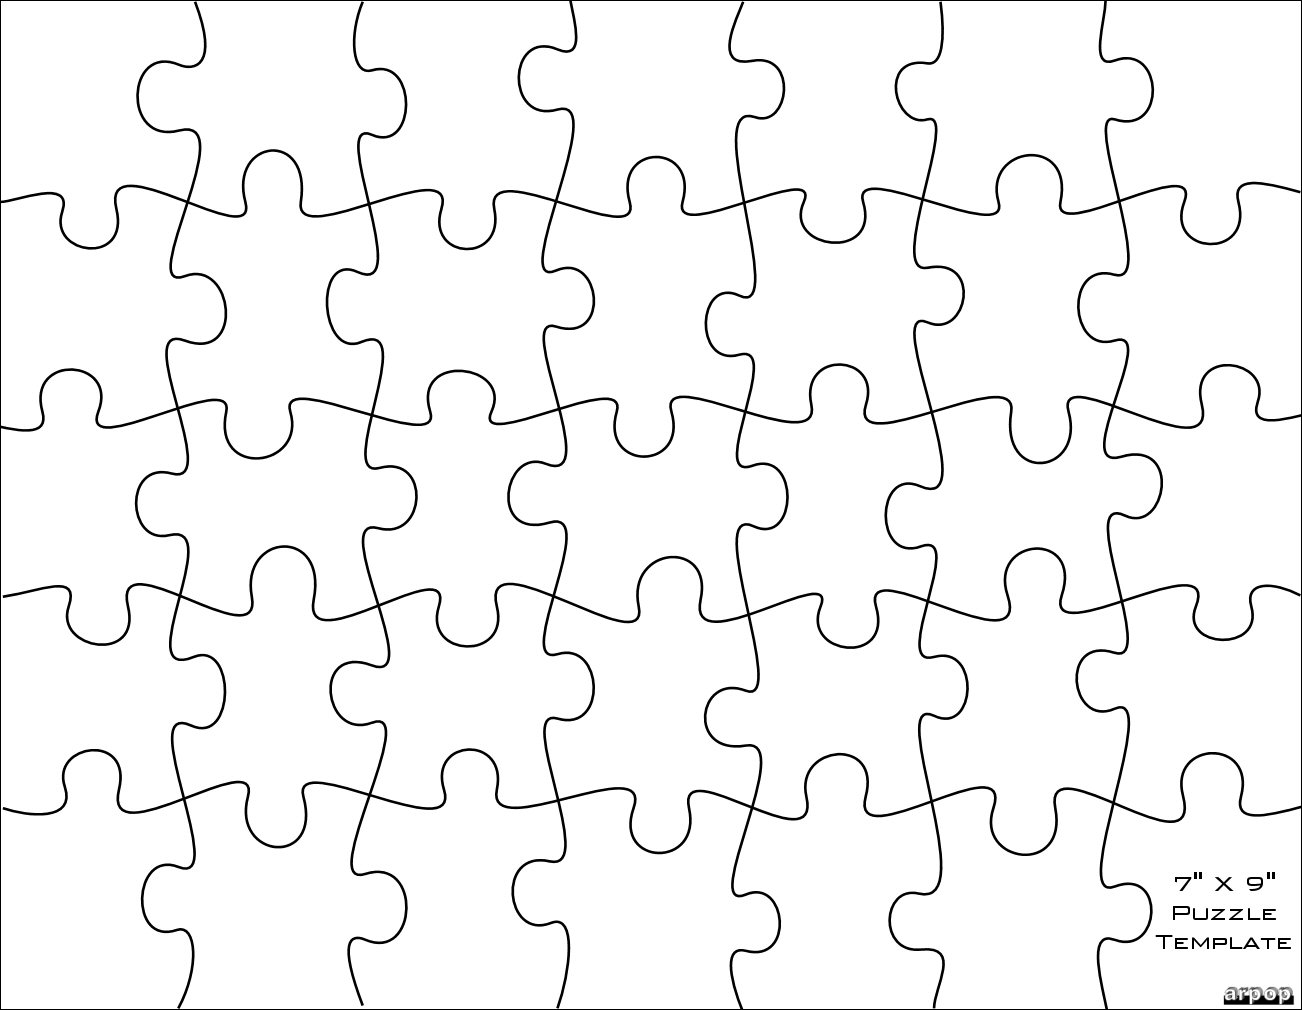 Free Puzzle Pieces Template, Download Free Puzzle Pieces Template Throughout Jigsaw Puzzle Template For Word